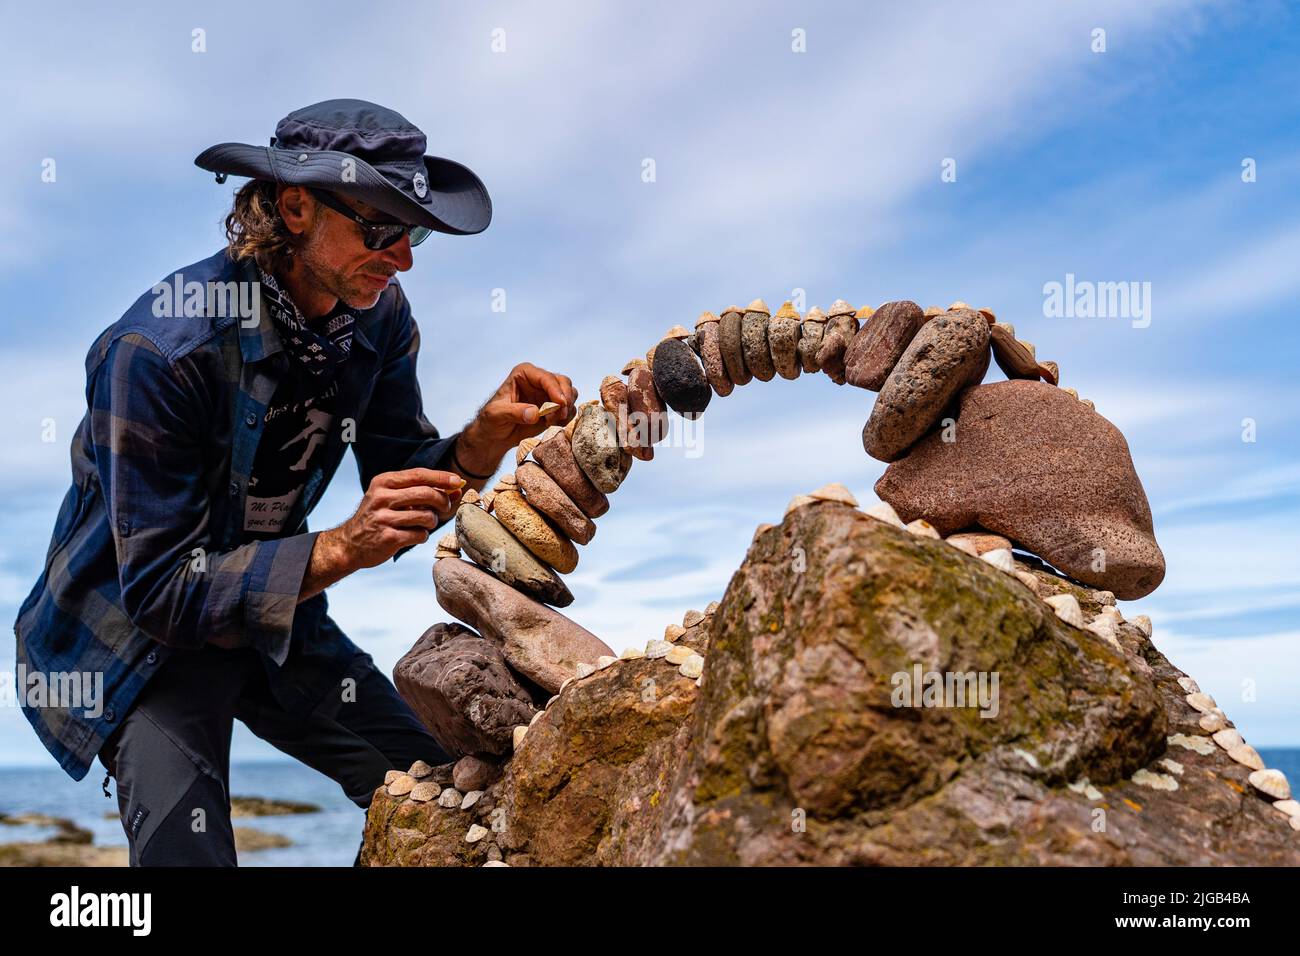 Dunbar, Scotland, UK. 9 July 2022. Day one of the 11th Stone Stacking Championships held at Eye Cave Beach in Dunbar in East Lothian. . Competitors are shown during the arch building competition. Pic; Pedro Duran and his stone arch. Iain Masterton/Alamy Live News Stock Photo